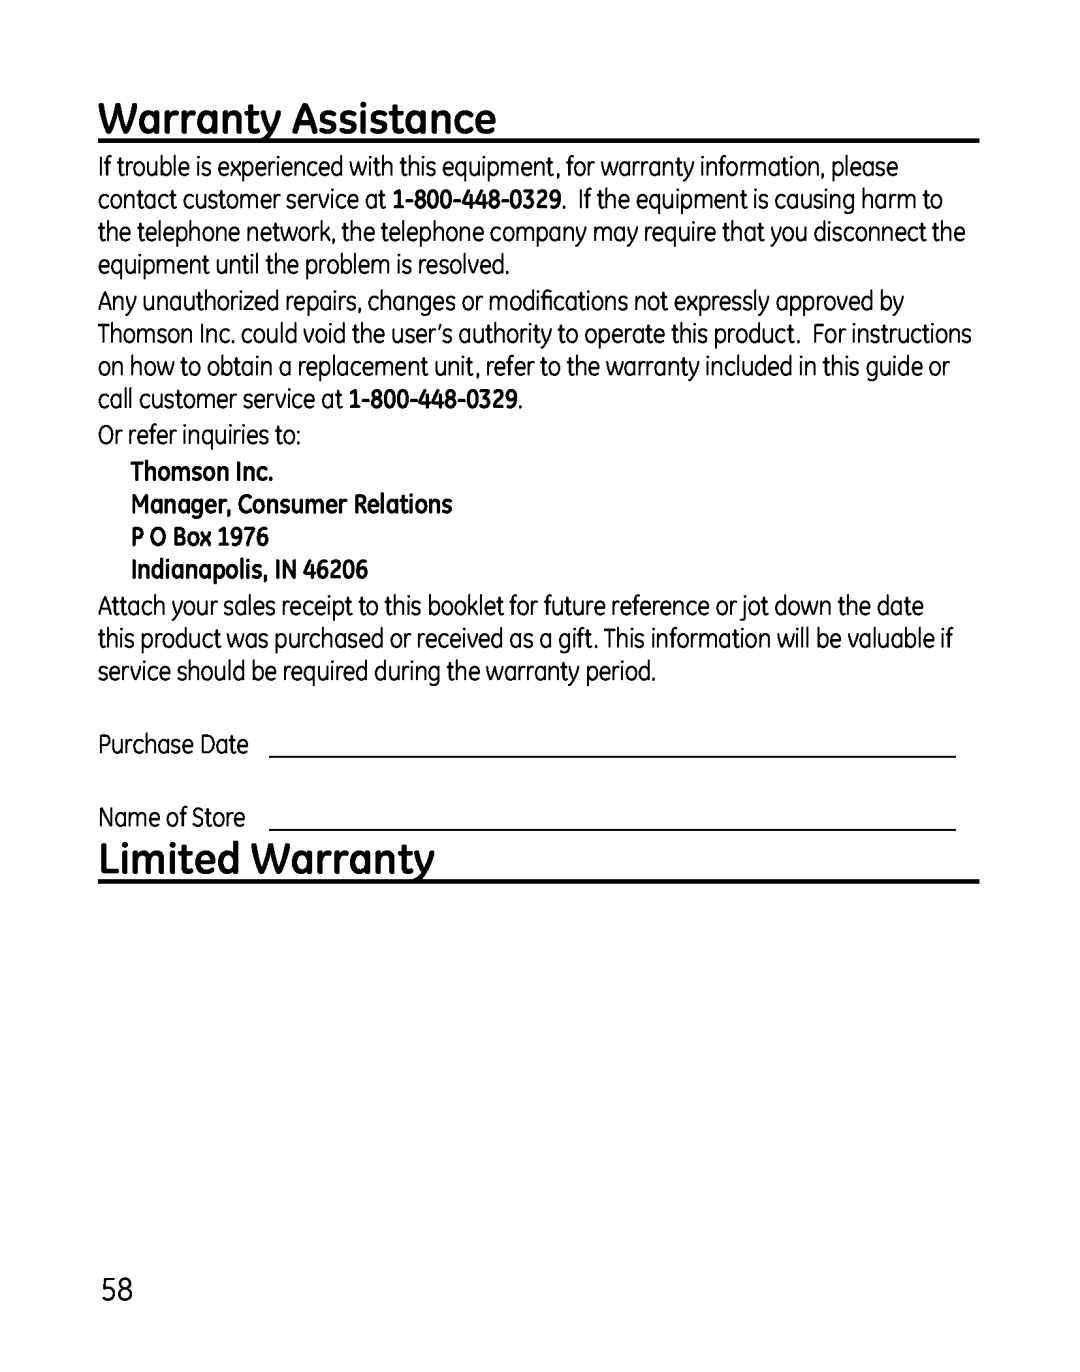 GE 28821xx5, 881 Warranty Assistance, Limited Warranty, Thomson Inc Manager, Consumer Relations P O Box Indianapolis, IN 